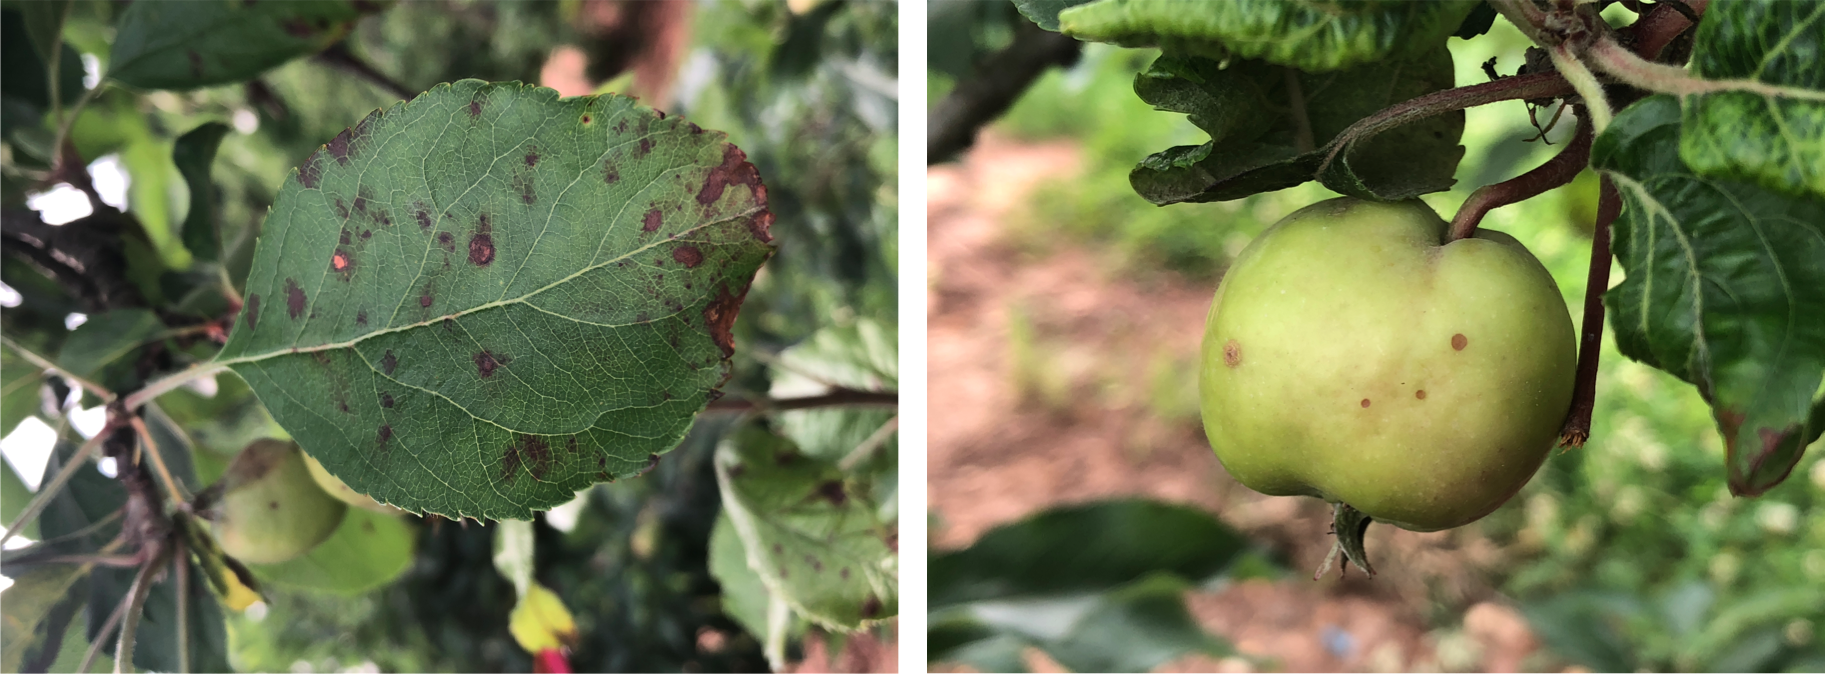 Early symptoms on Glomerella leaf spot (left) and fruit spot/rot